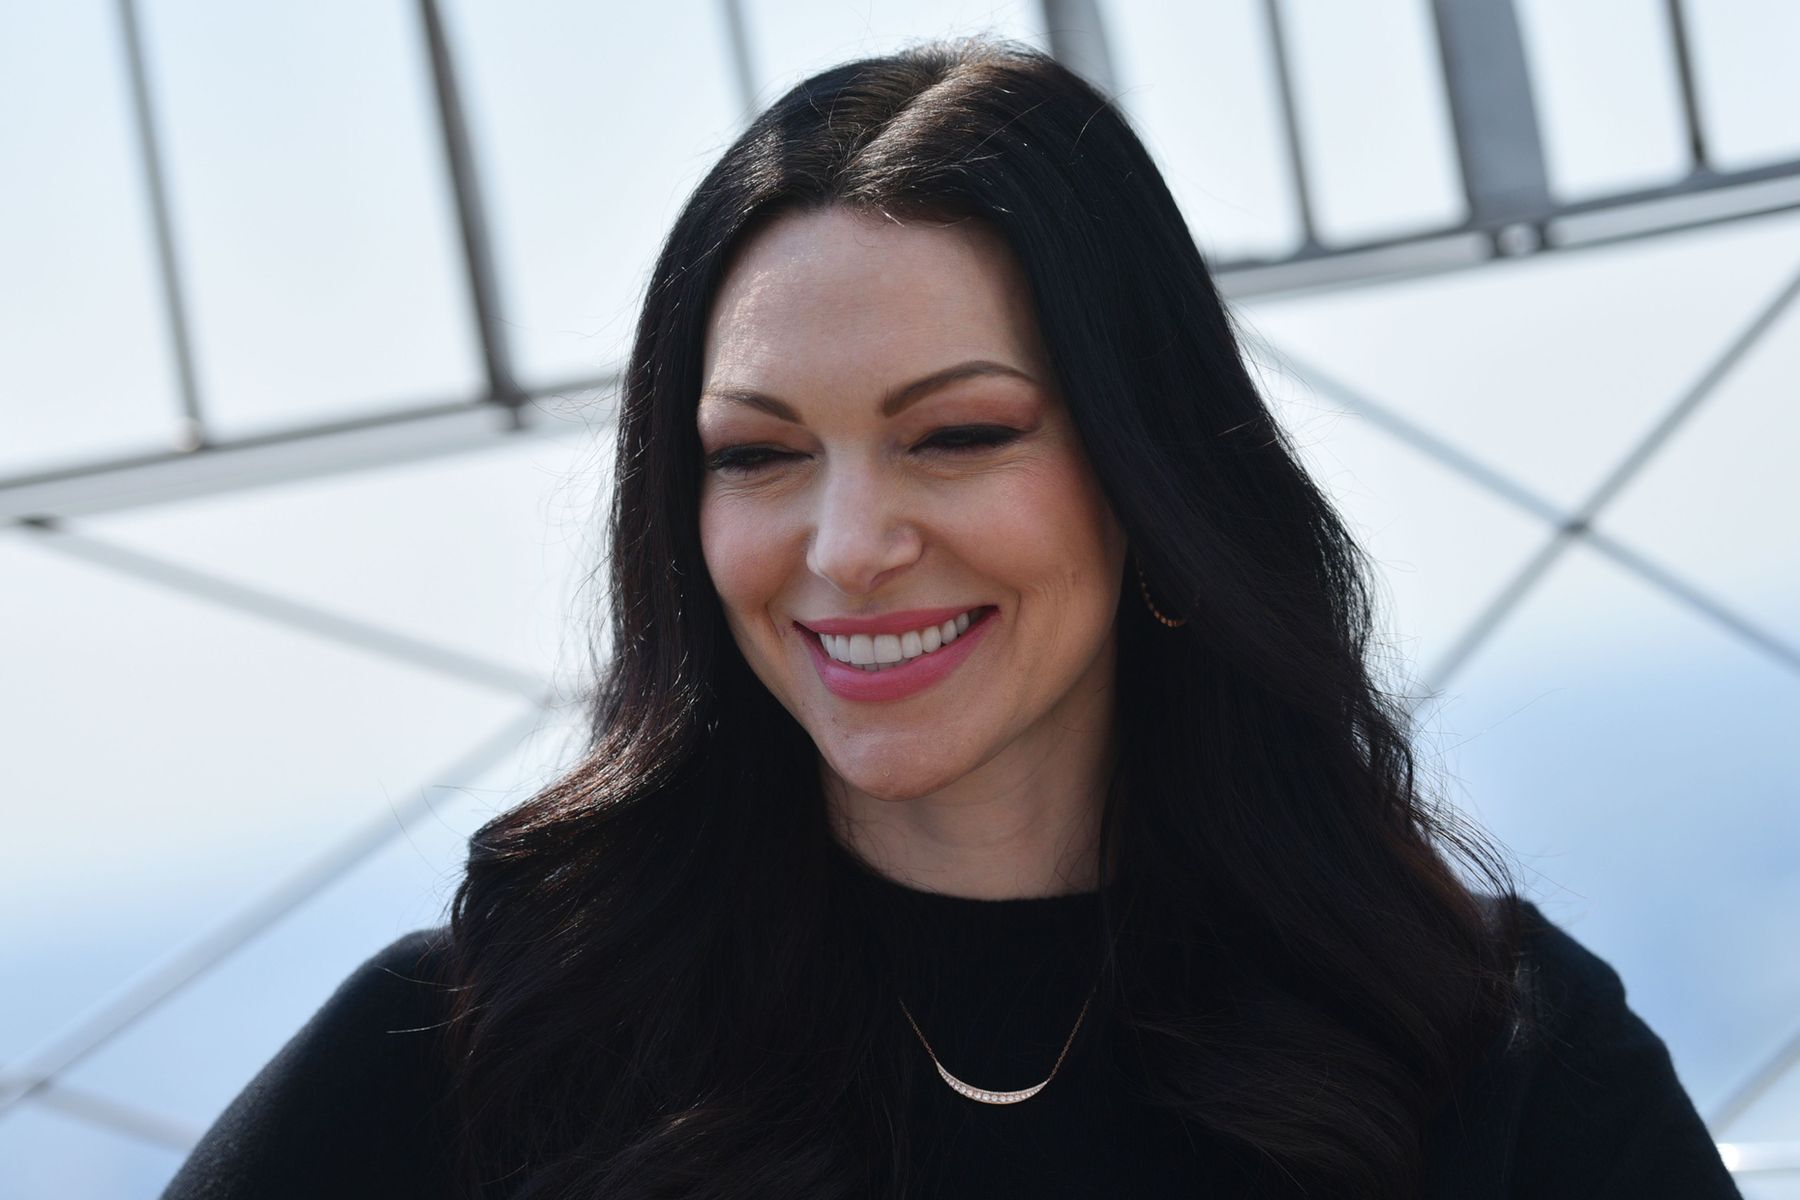 <p>The<em> Orange Is the New Black</em> star reportedly began dating the actor two years after his split from Holmes. Prepon denied the rumours, though, telling <a href="https://www.sheknows.com/entertainment/articles/1035405/interview-laura-prepon-shoots-down-tom-cruise-rumors/" class="atom_link atom_valid"><em>SheKnows</em></a>: “It’s just so funny that, when people don’t know, they just make stuff up, [like], apparently I’m dating Tom Cruise right now. And apparently he doesn’t want me doing the show because I portray a lesbian and I’m a Scientologist. This is false; where are they even getting this stuff? It’s unbelievable to me.”</p>